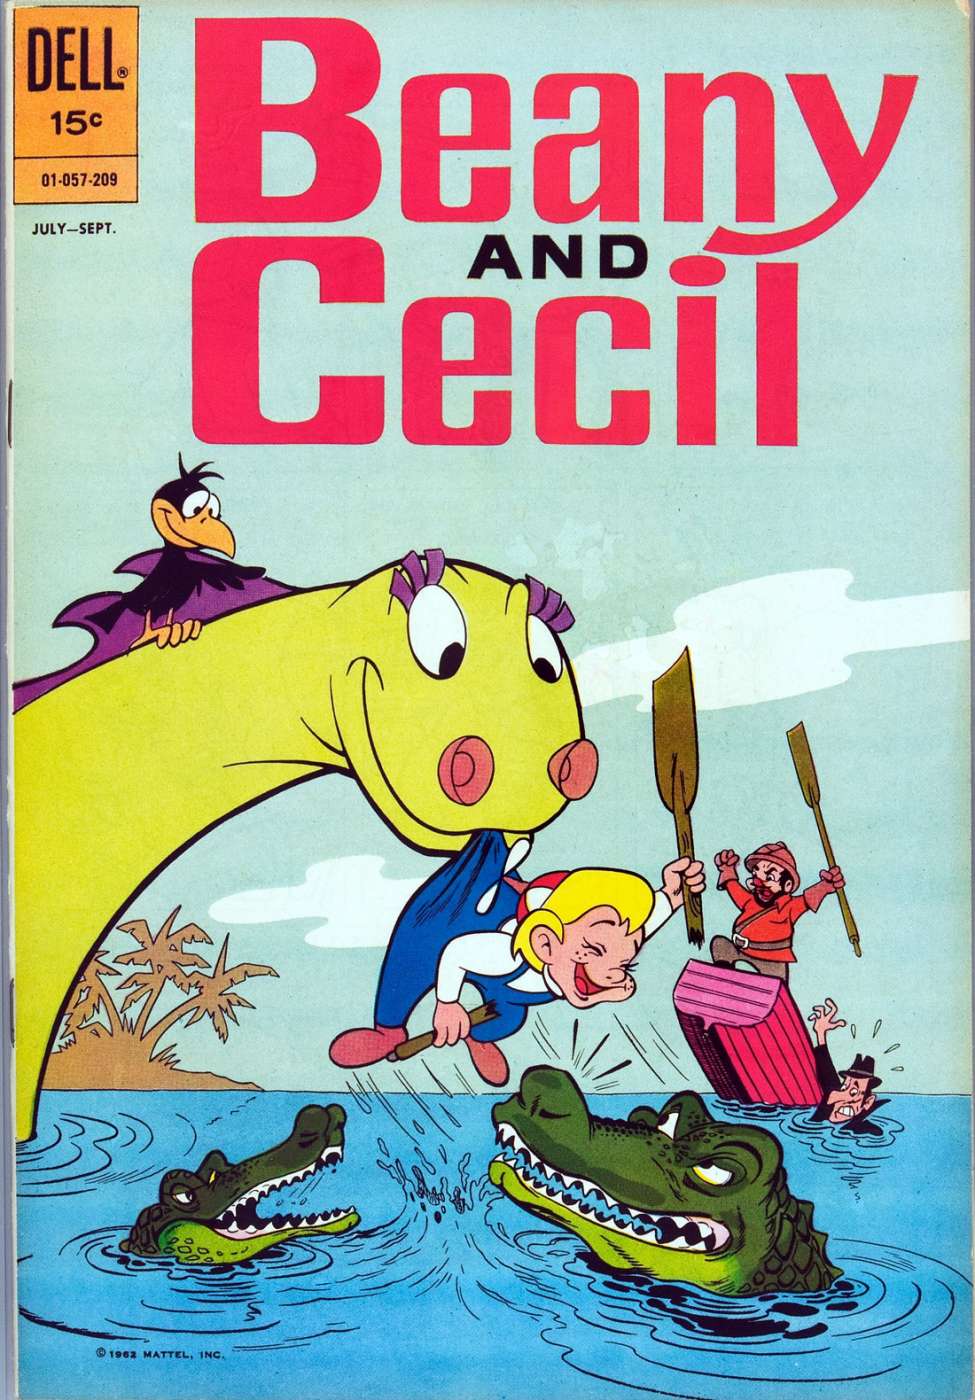 Book Cover For Beany and Cecil 1 (nn)